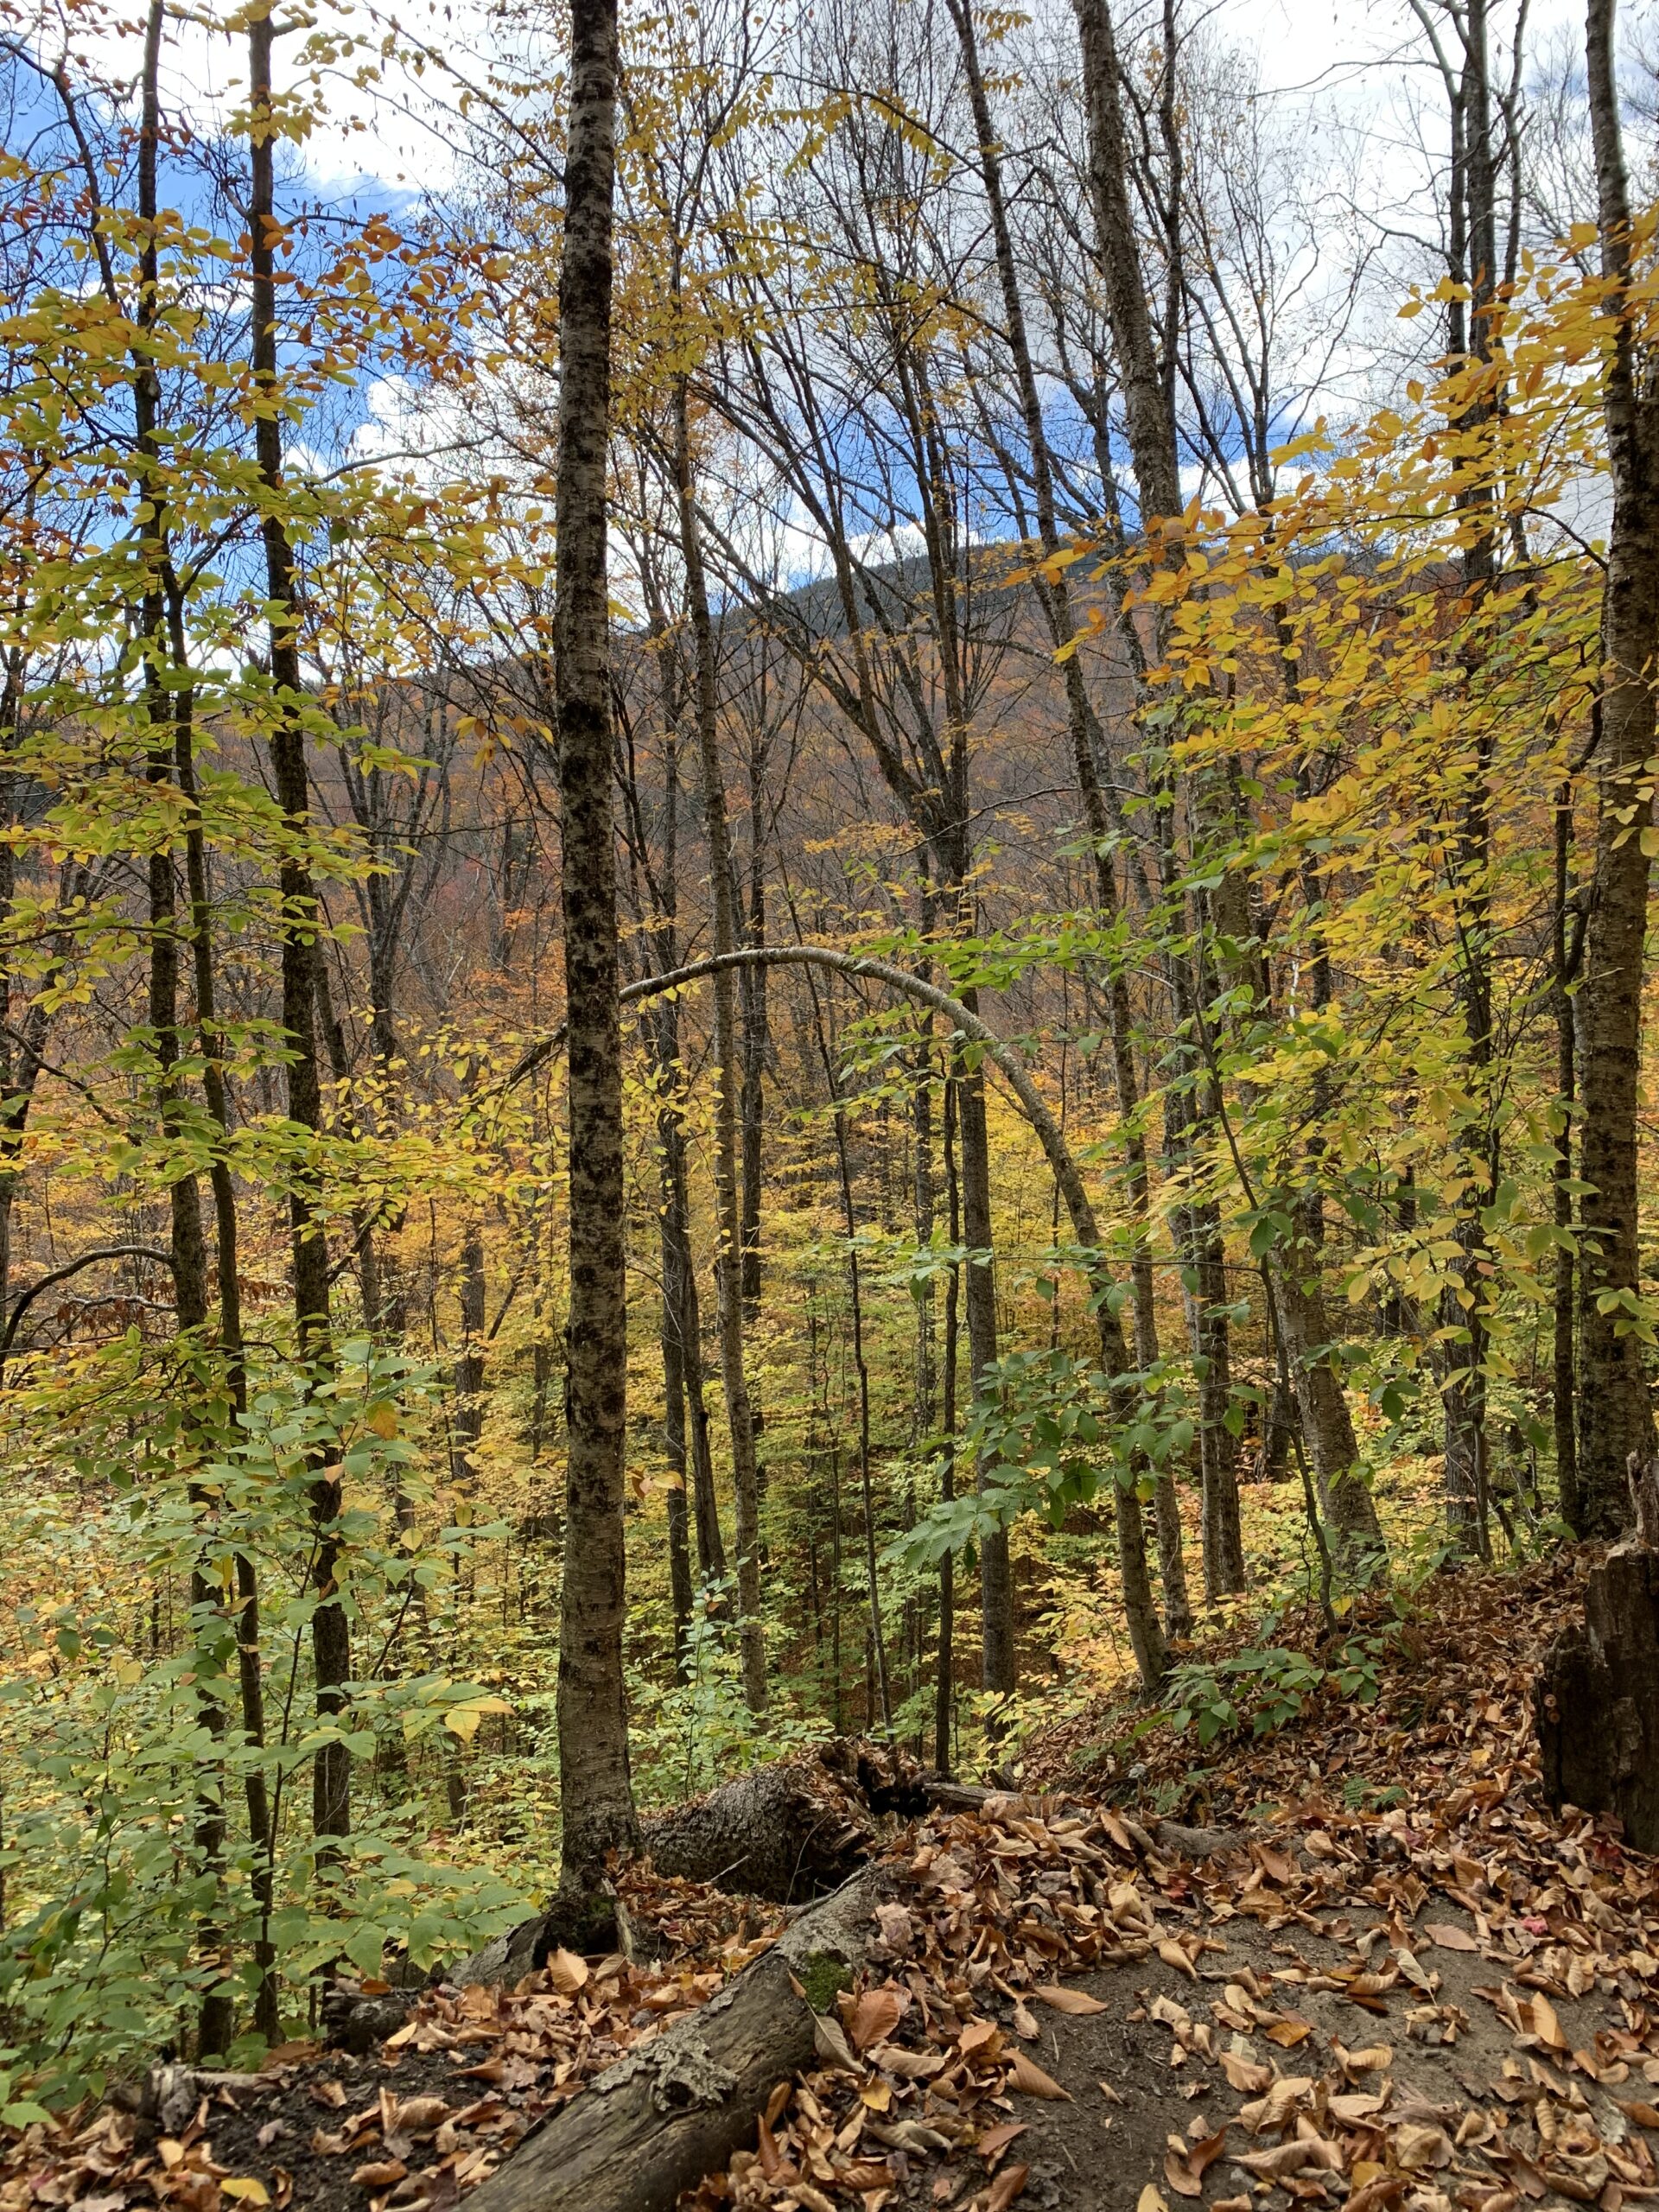 A stand of trees with leaves, some green and some yellow. Brown forest floor with golden leaves in the foreground.